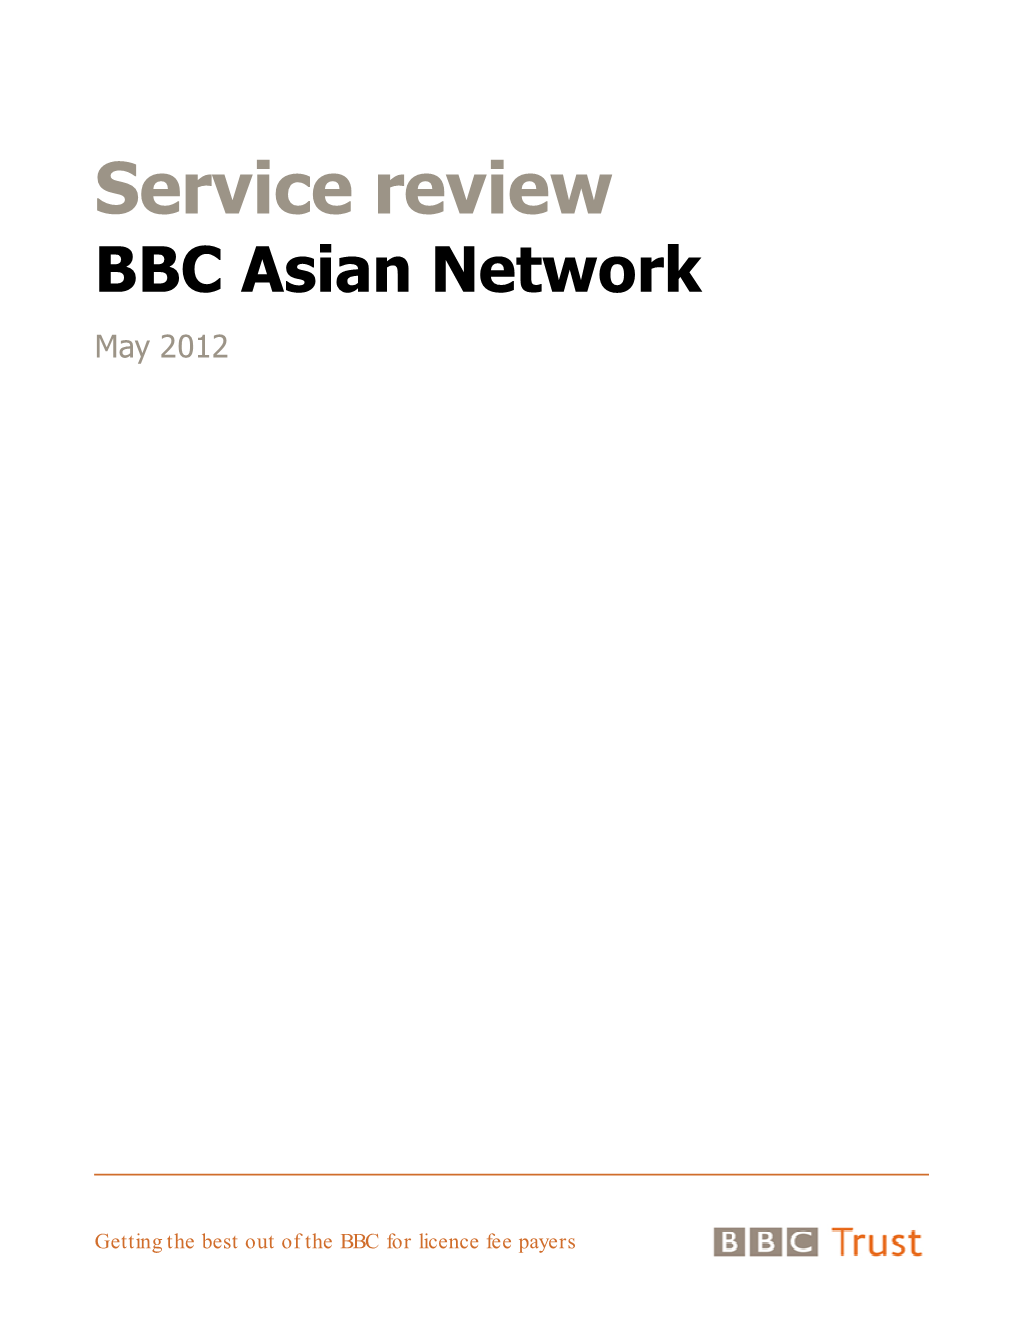 Asian Network Service Review